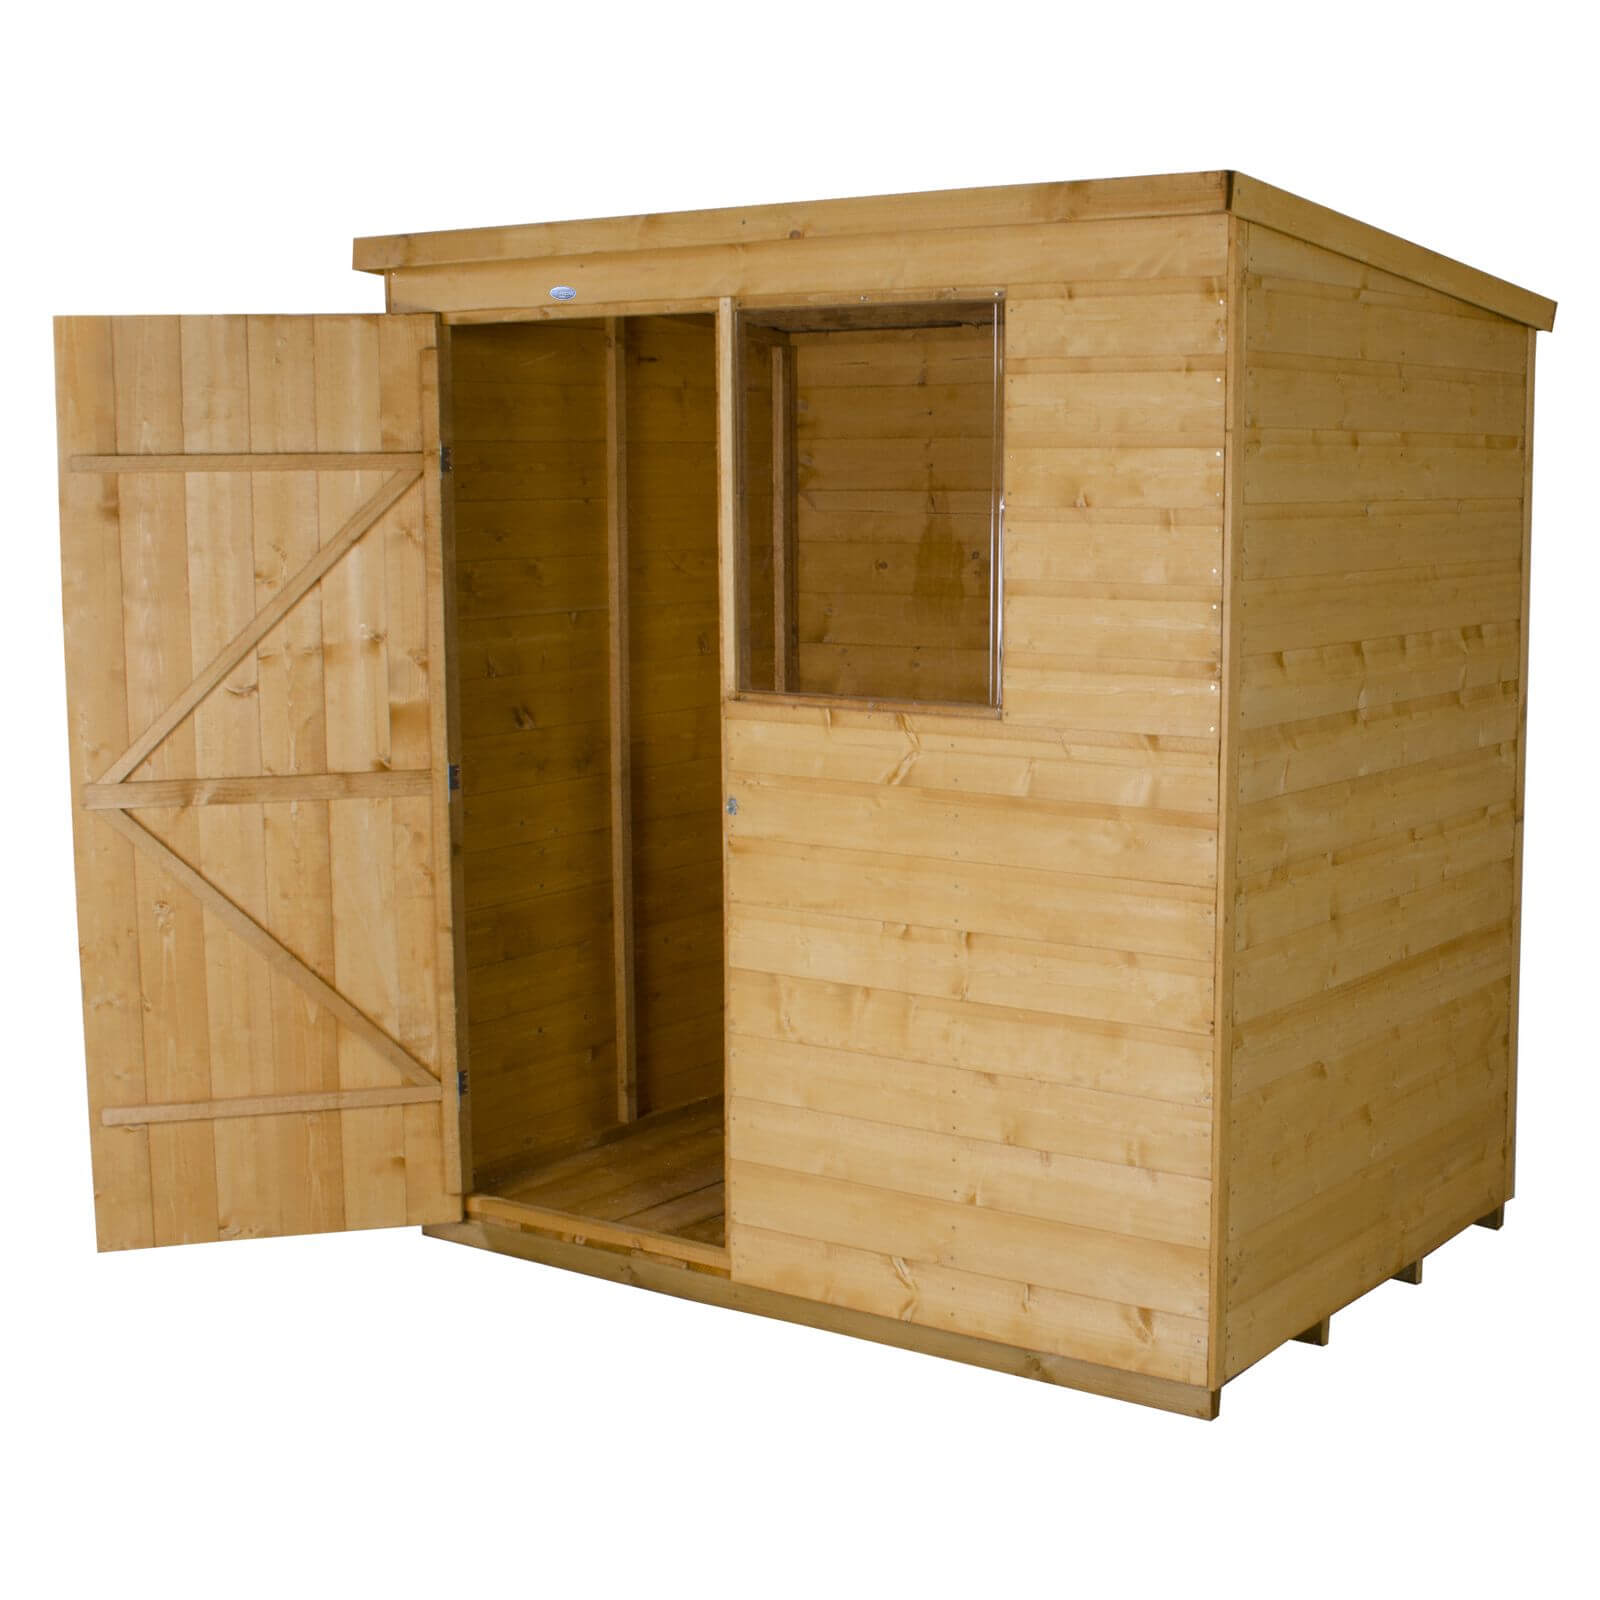 6x4ft Forest Golden Brown Shiplap Pent Wooden Shed